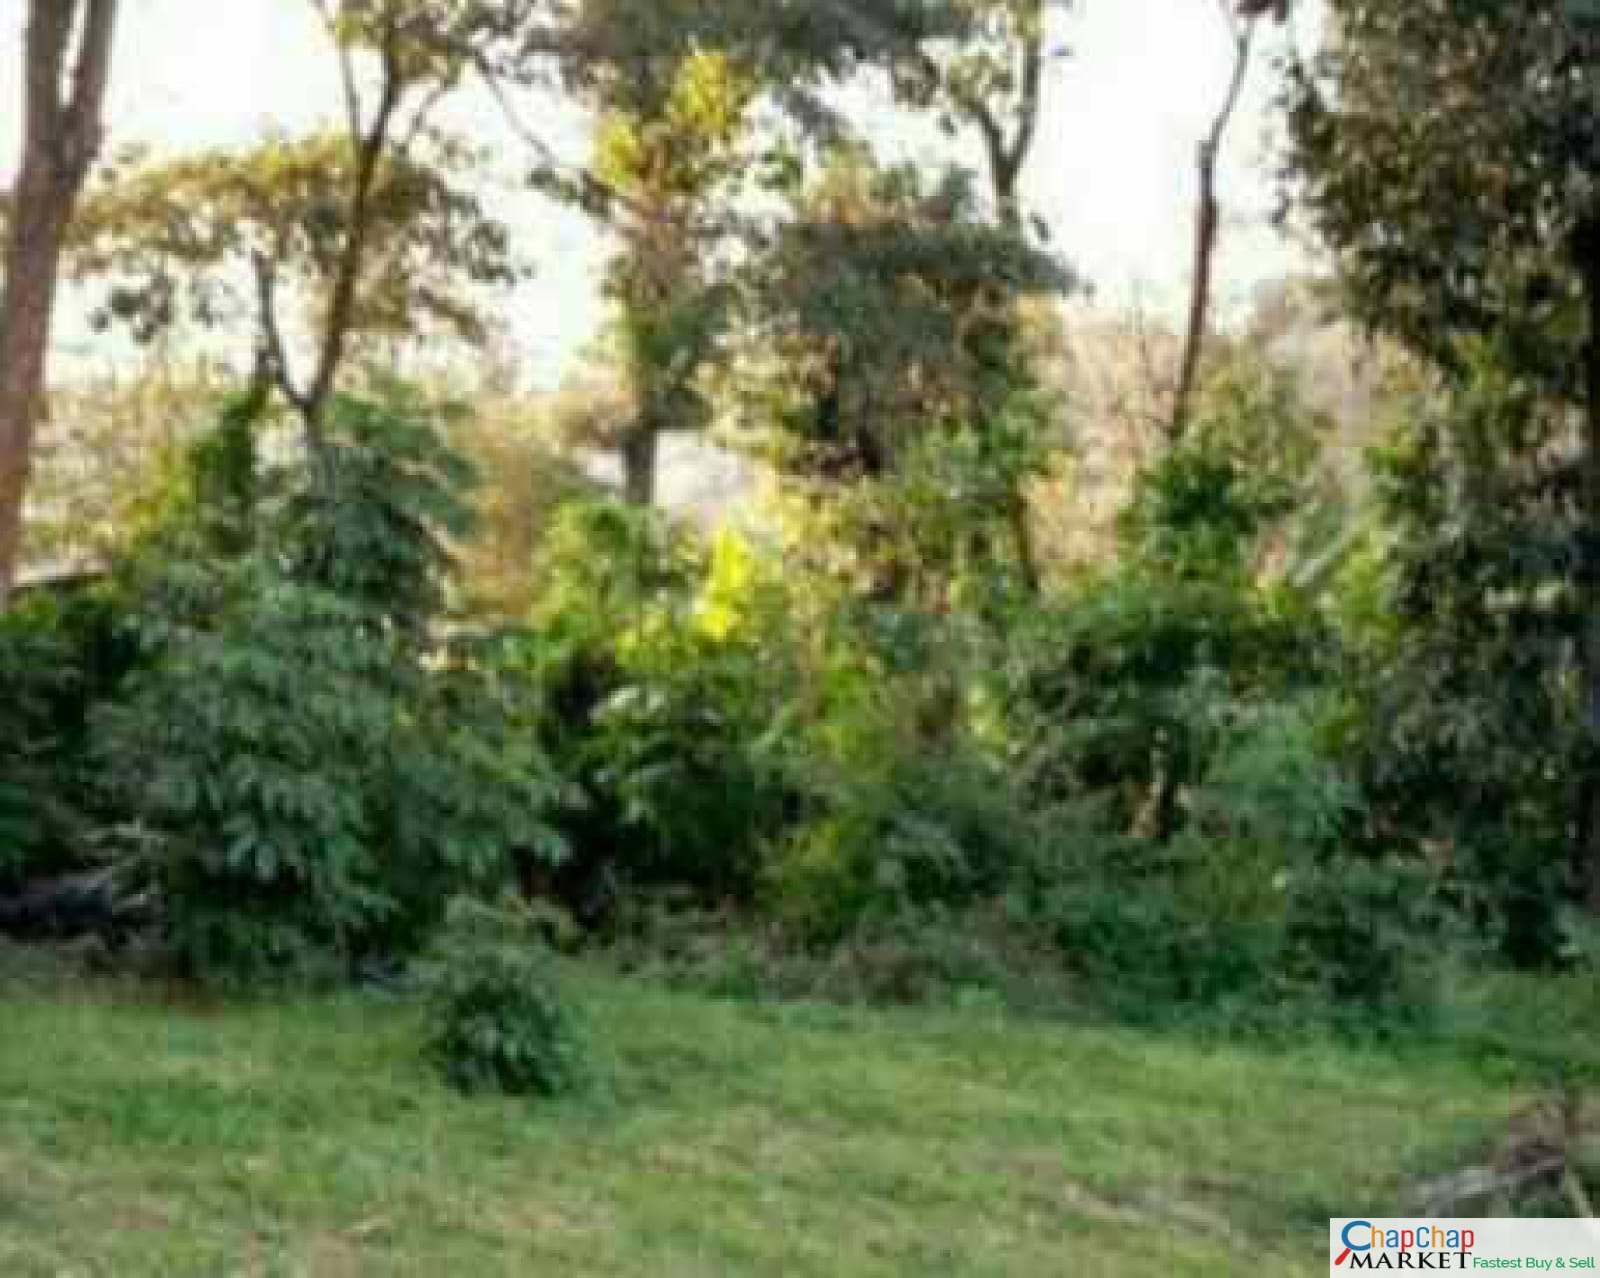 Real Estate Land For Sale-List of 100 Land For Sale In Karen Kenya Ready Clean Title Deed, House For Sale and Rent BEST PRICES acre Acres 24